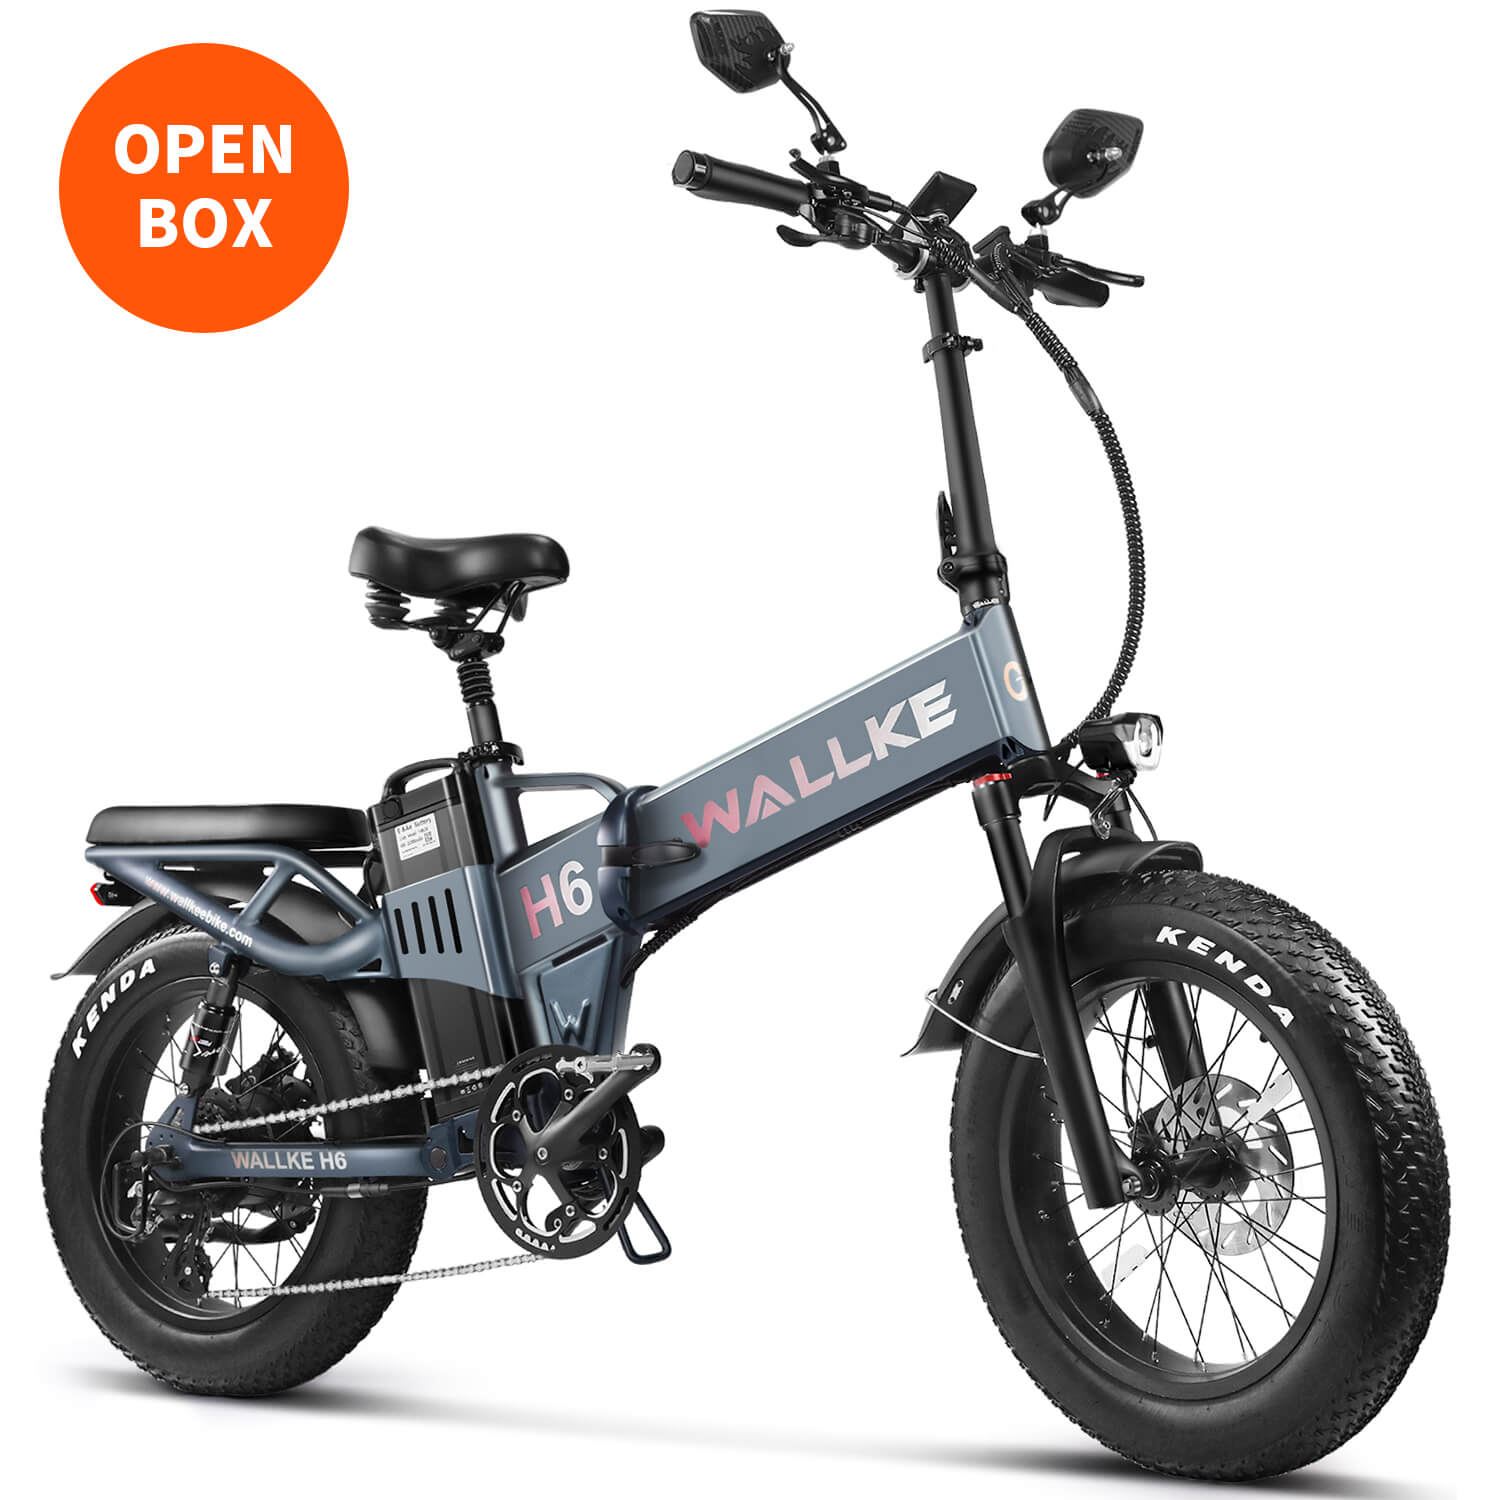 Wallke-H6-Fat tire electric bicycle, equipped with two-way light effect, makes you safer to ride at night